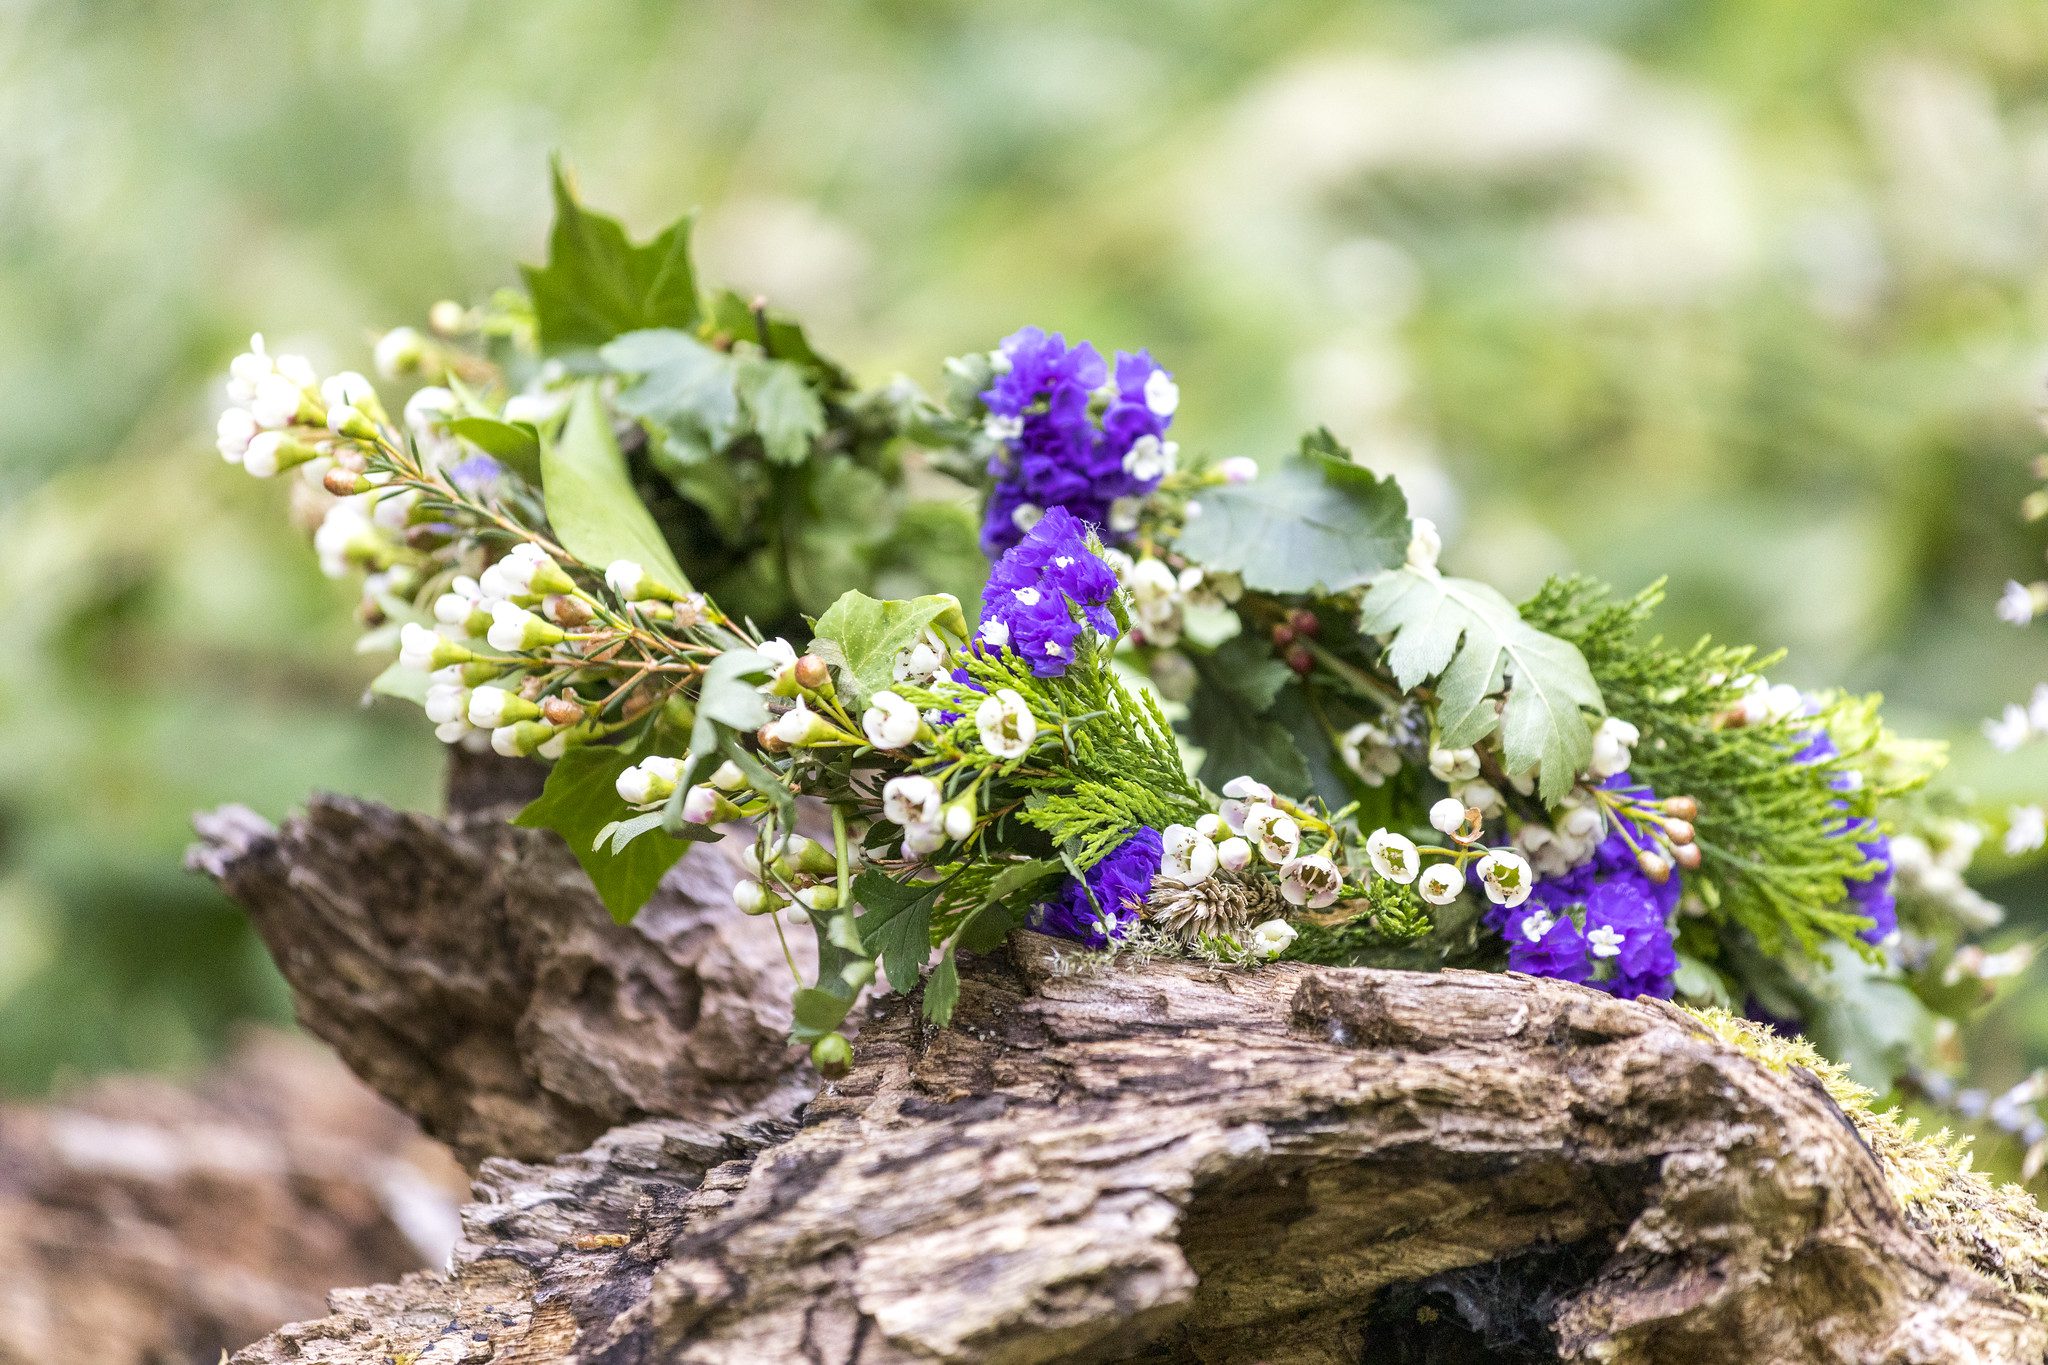 Wreath on a wooden log. Purple, green and white colours.